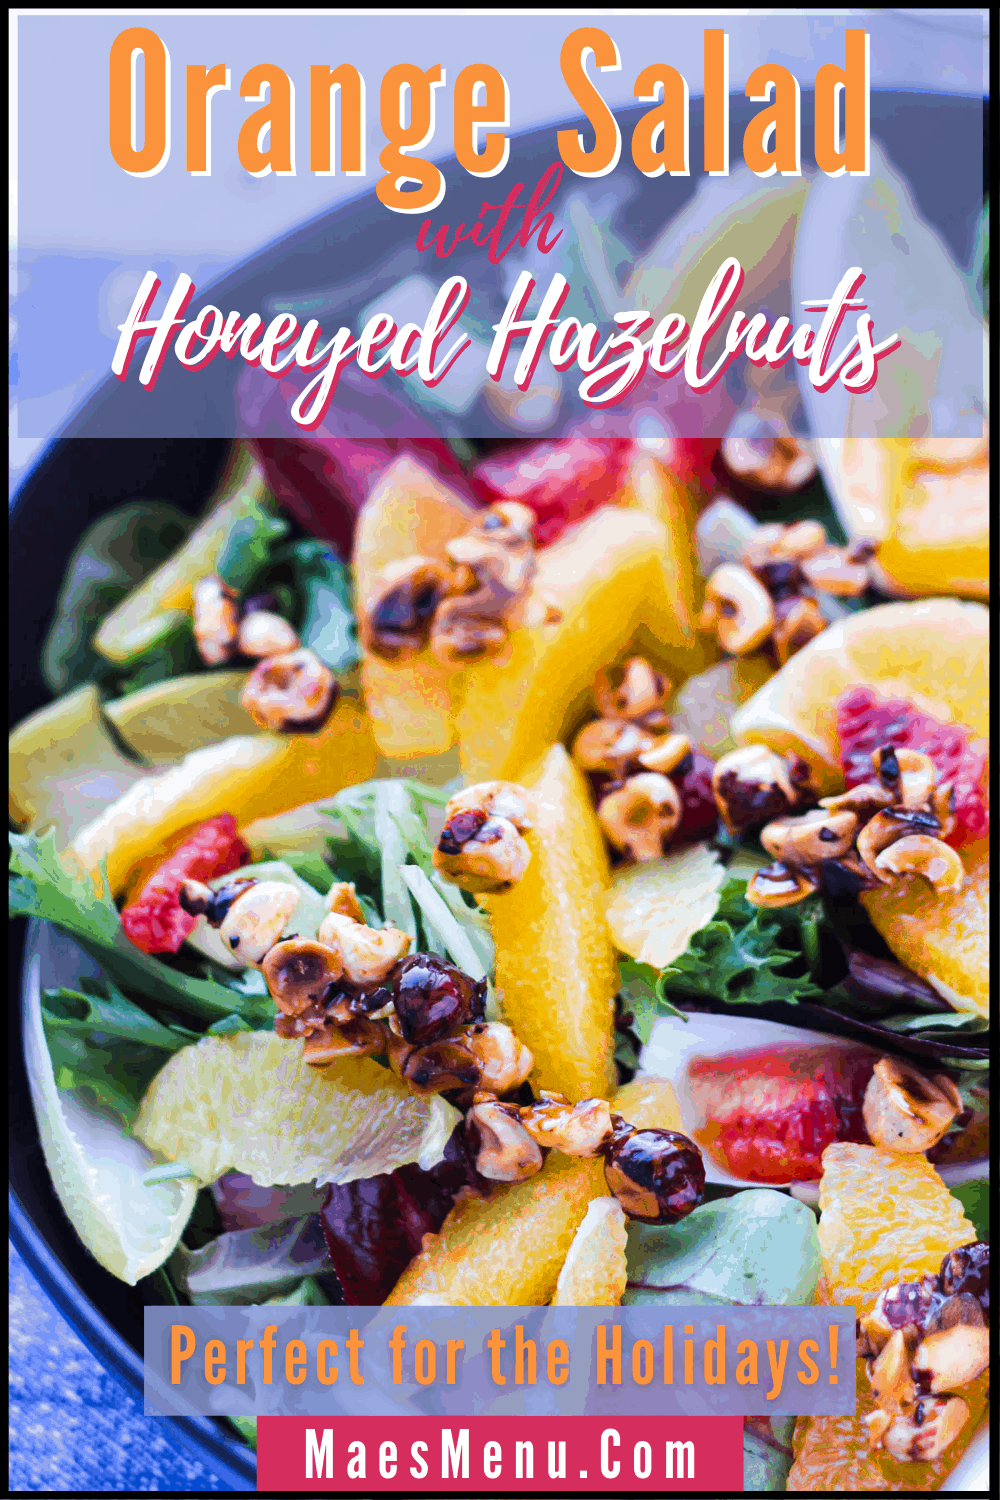 A pinterest pin for orange salad with honeyed hazelnuts. On the image is an up-close shot of the salad